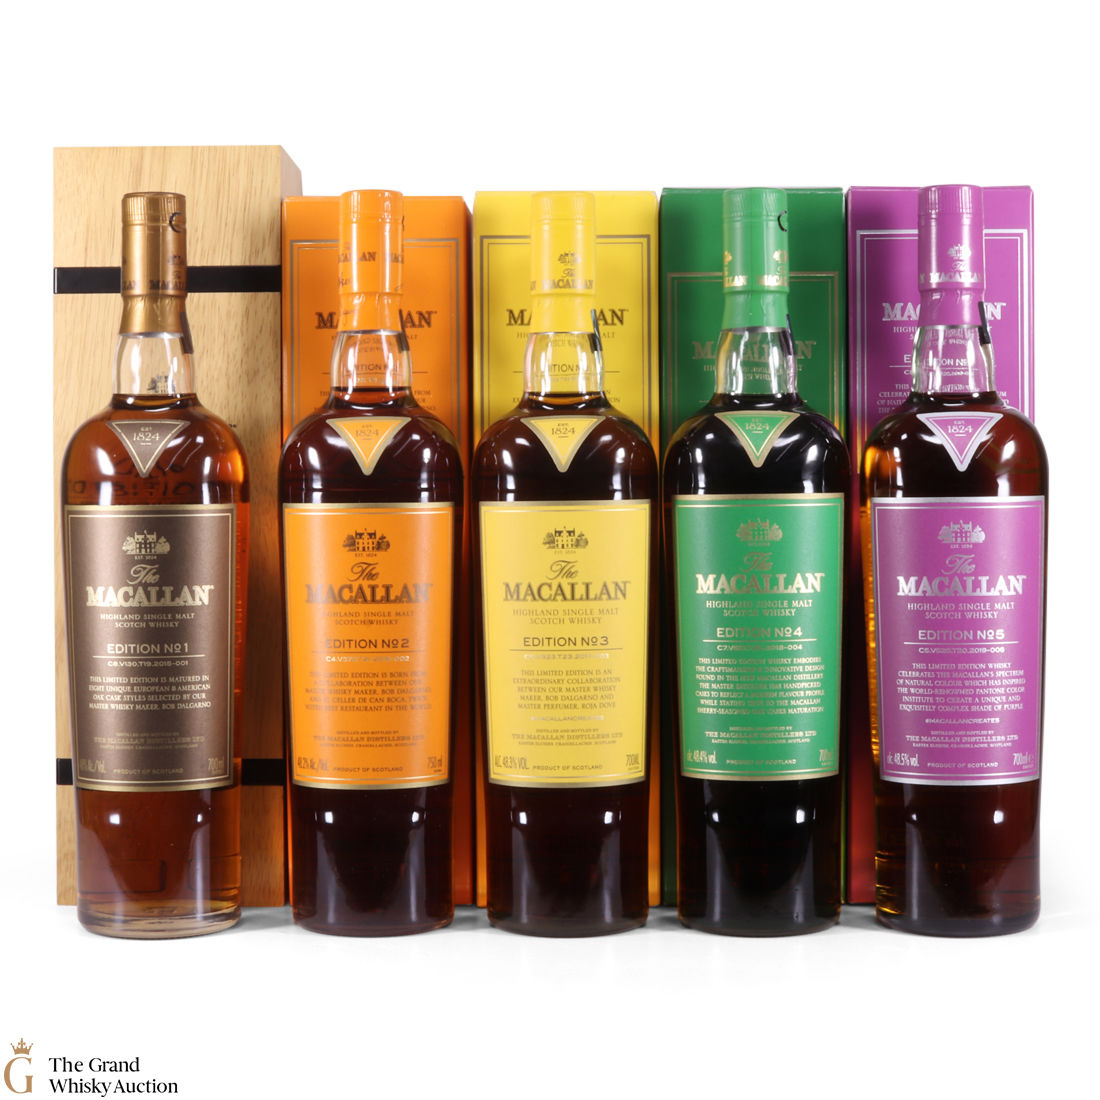 Macallan Edition 1 2 3 4 5 Auction The Grand Whisky Auction